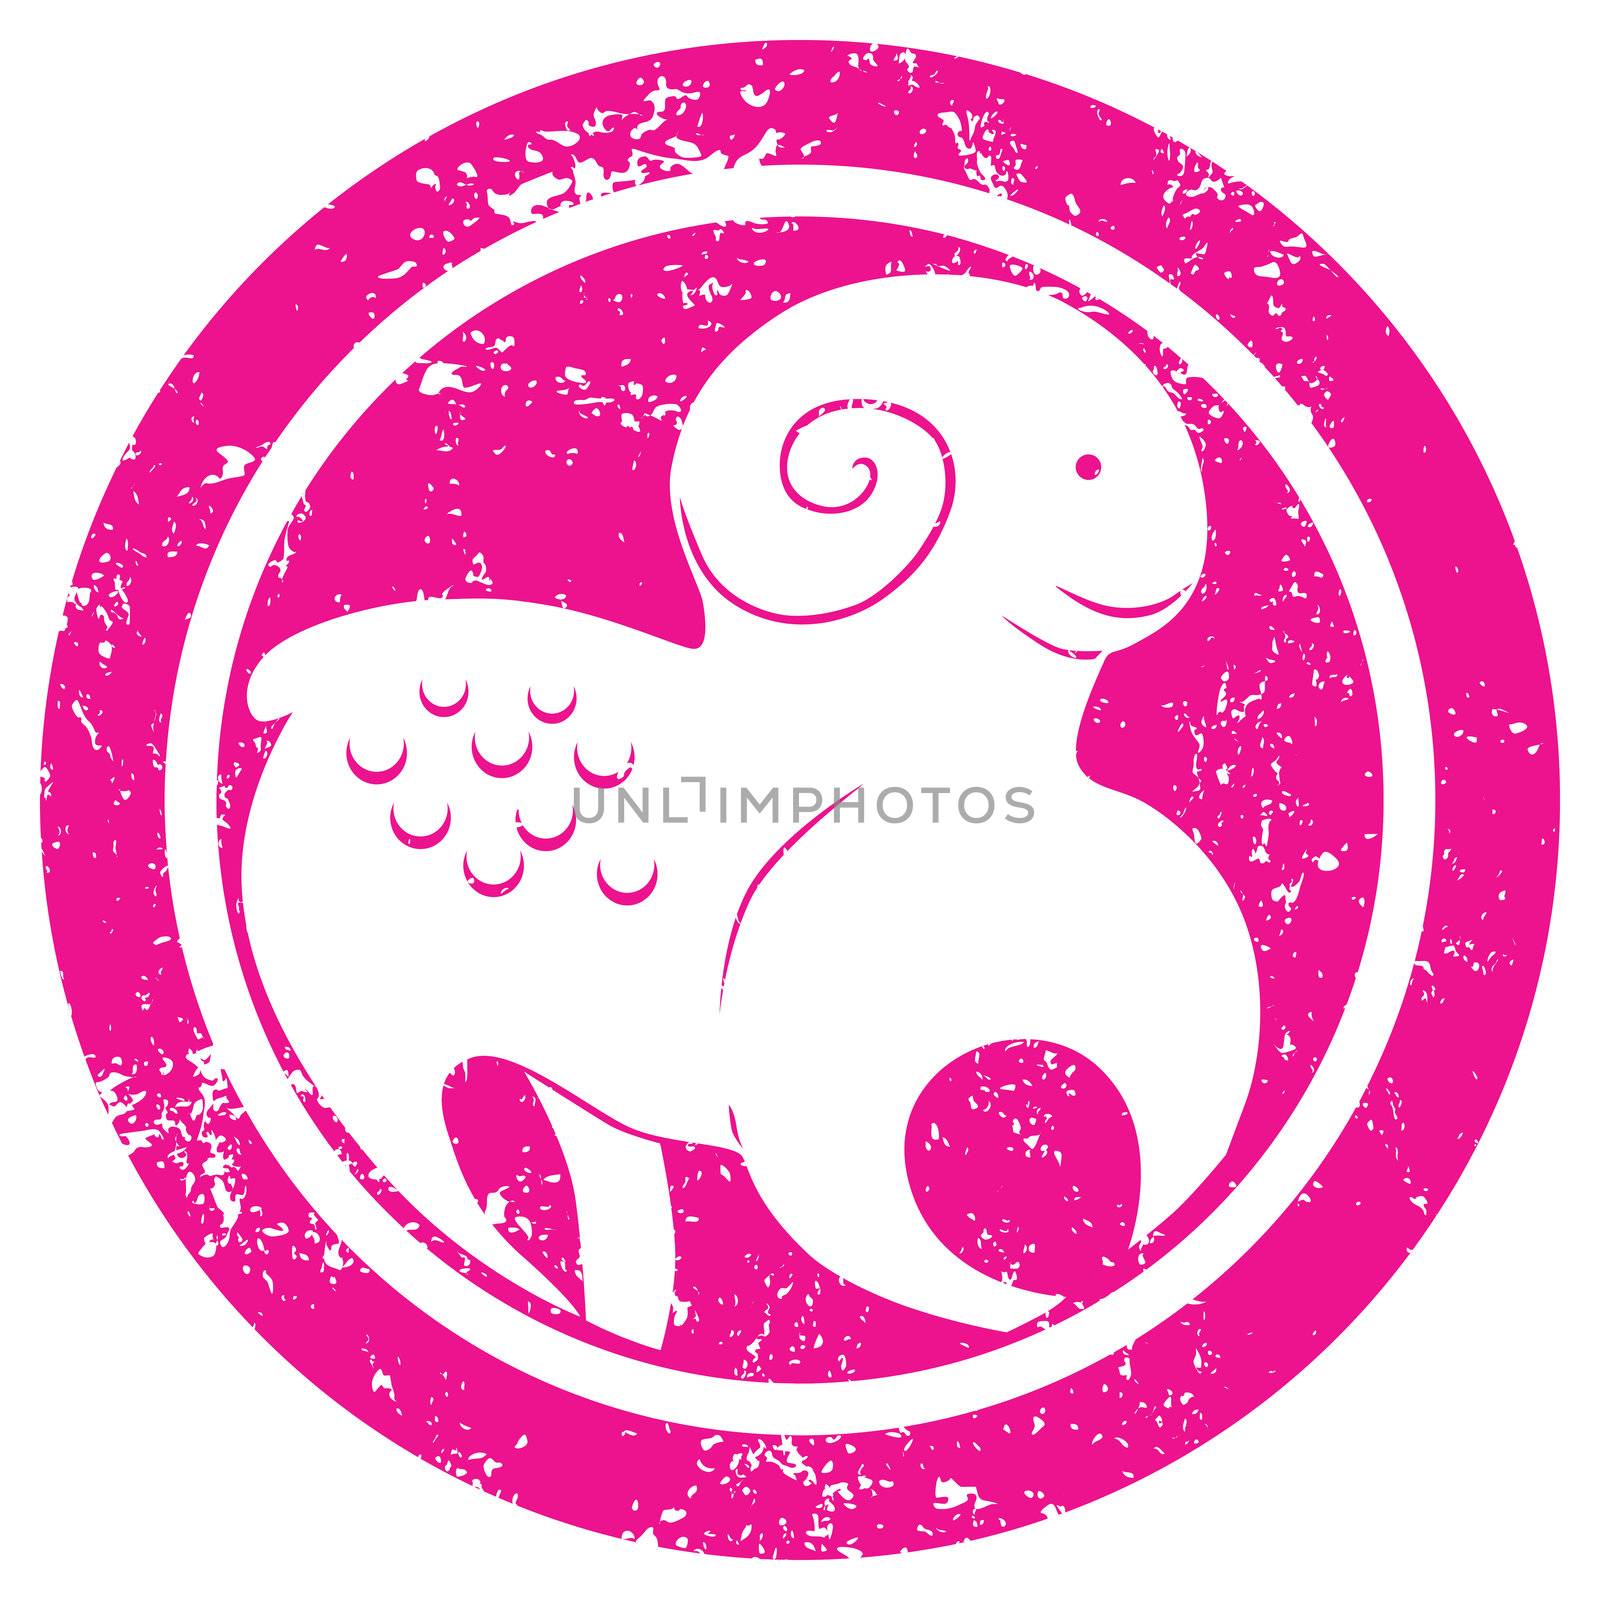 Stylized zodiac sign, The Ram stamp, isolated object over white background